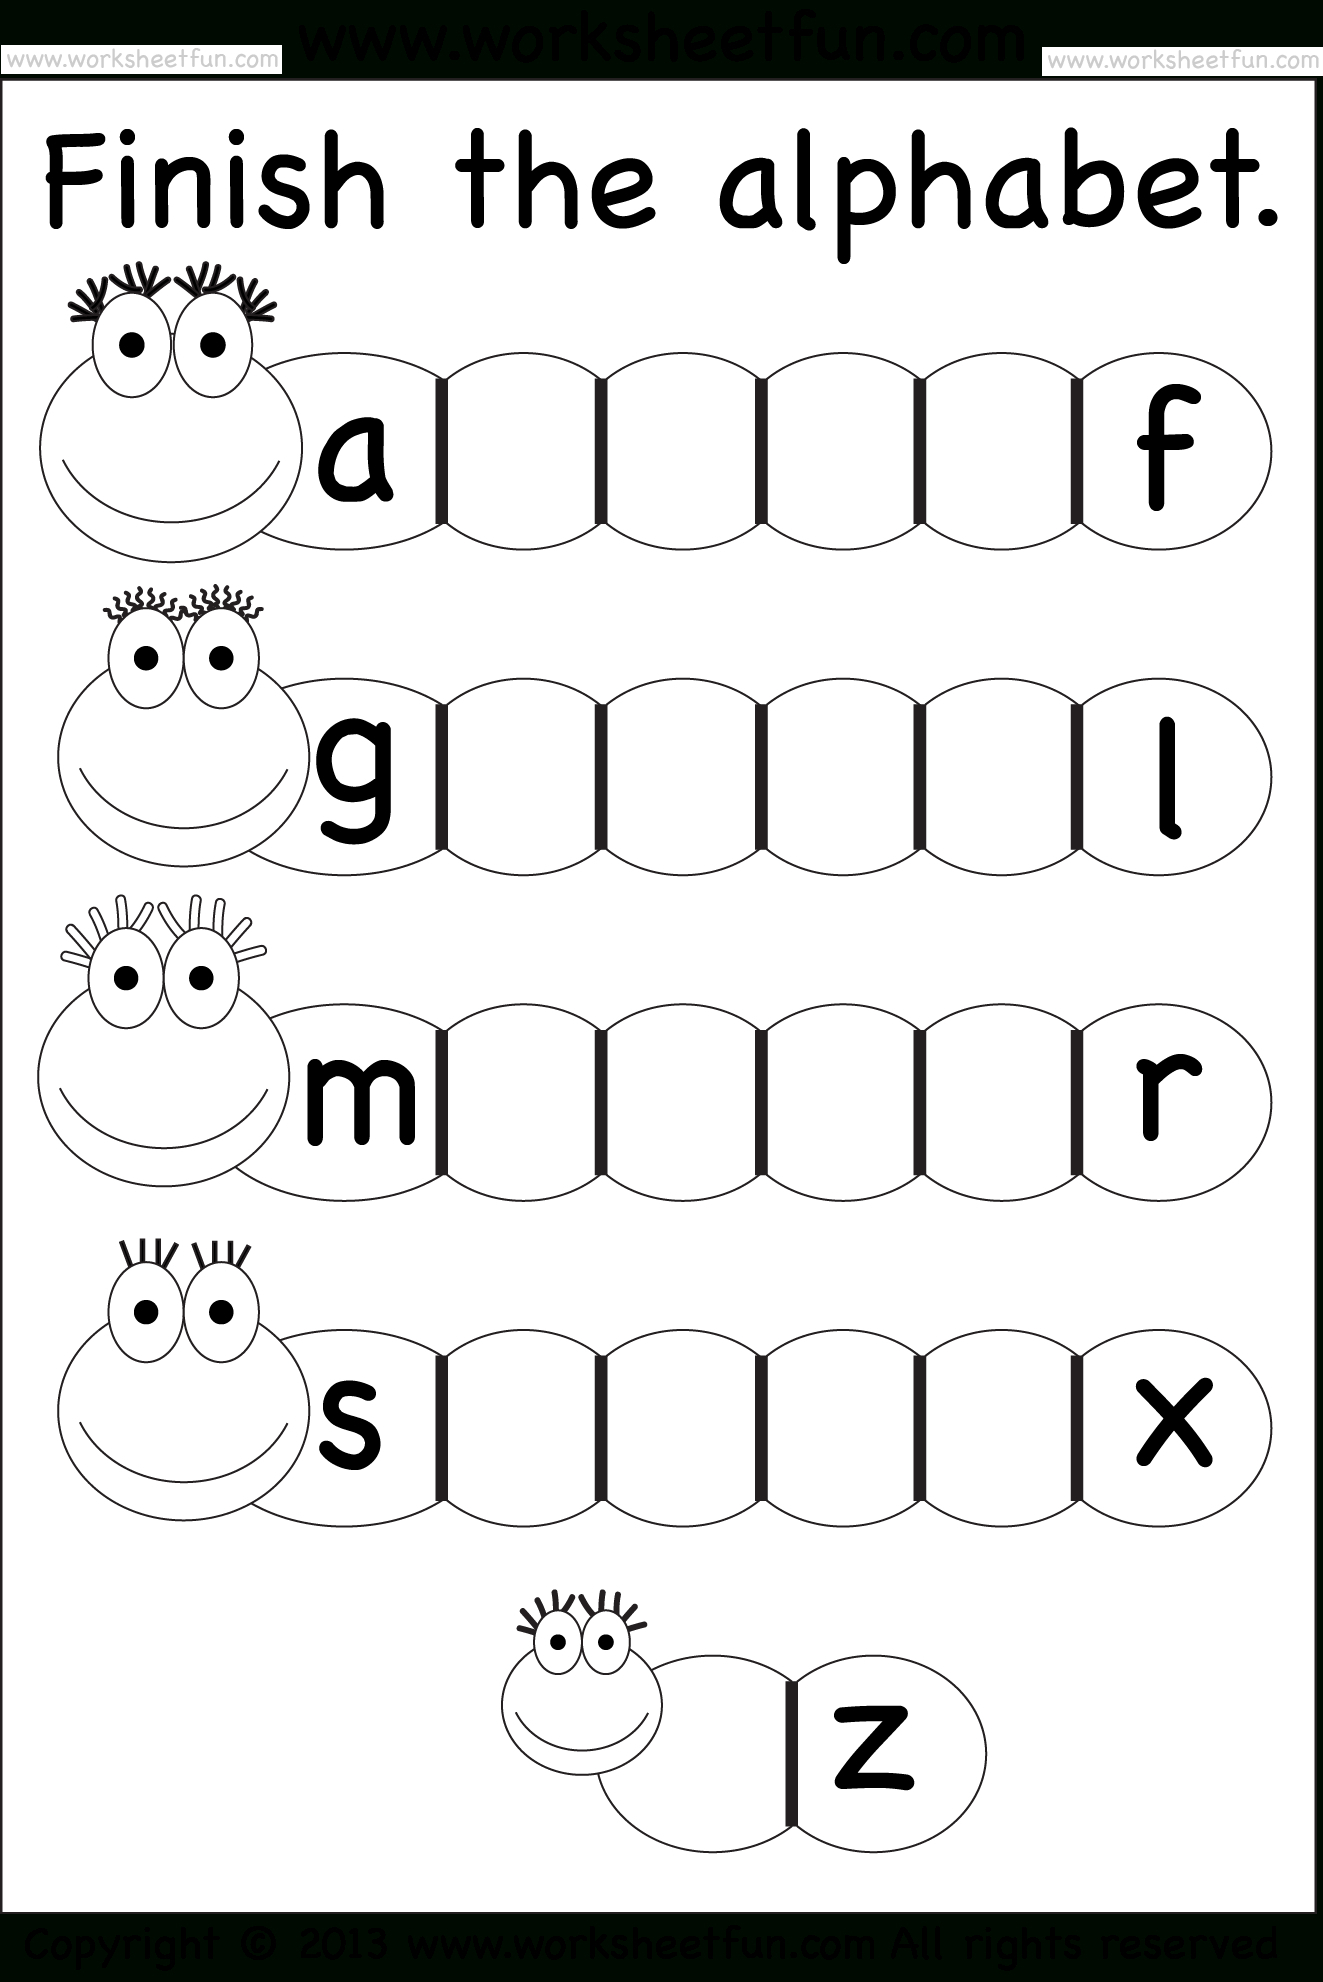 talking alphabet and numbers book for children